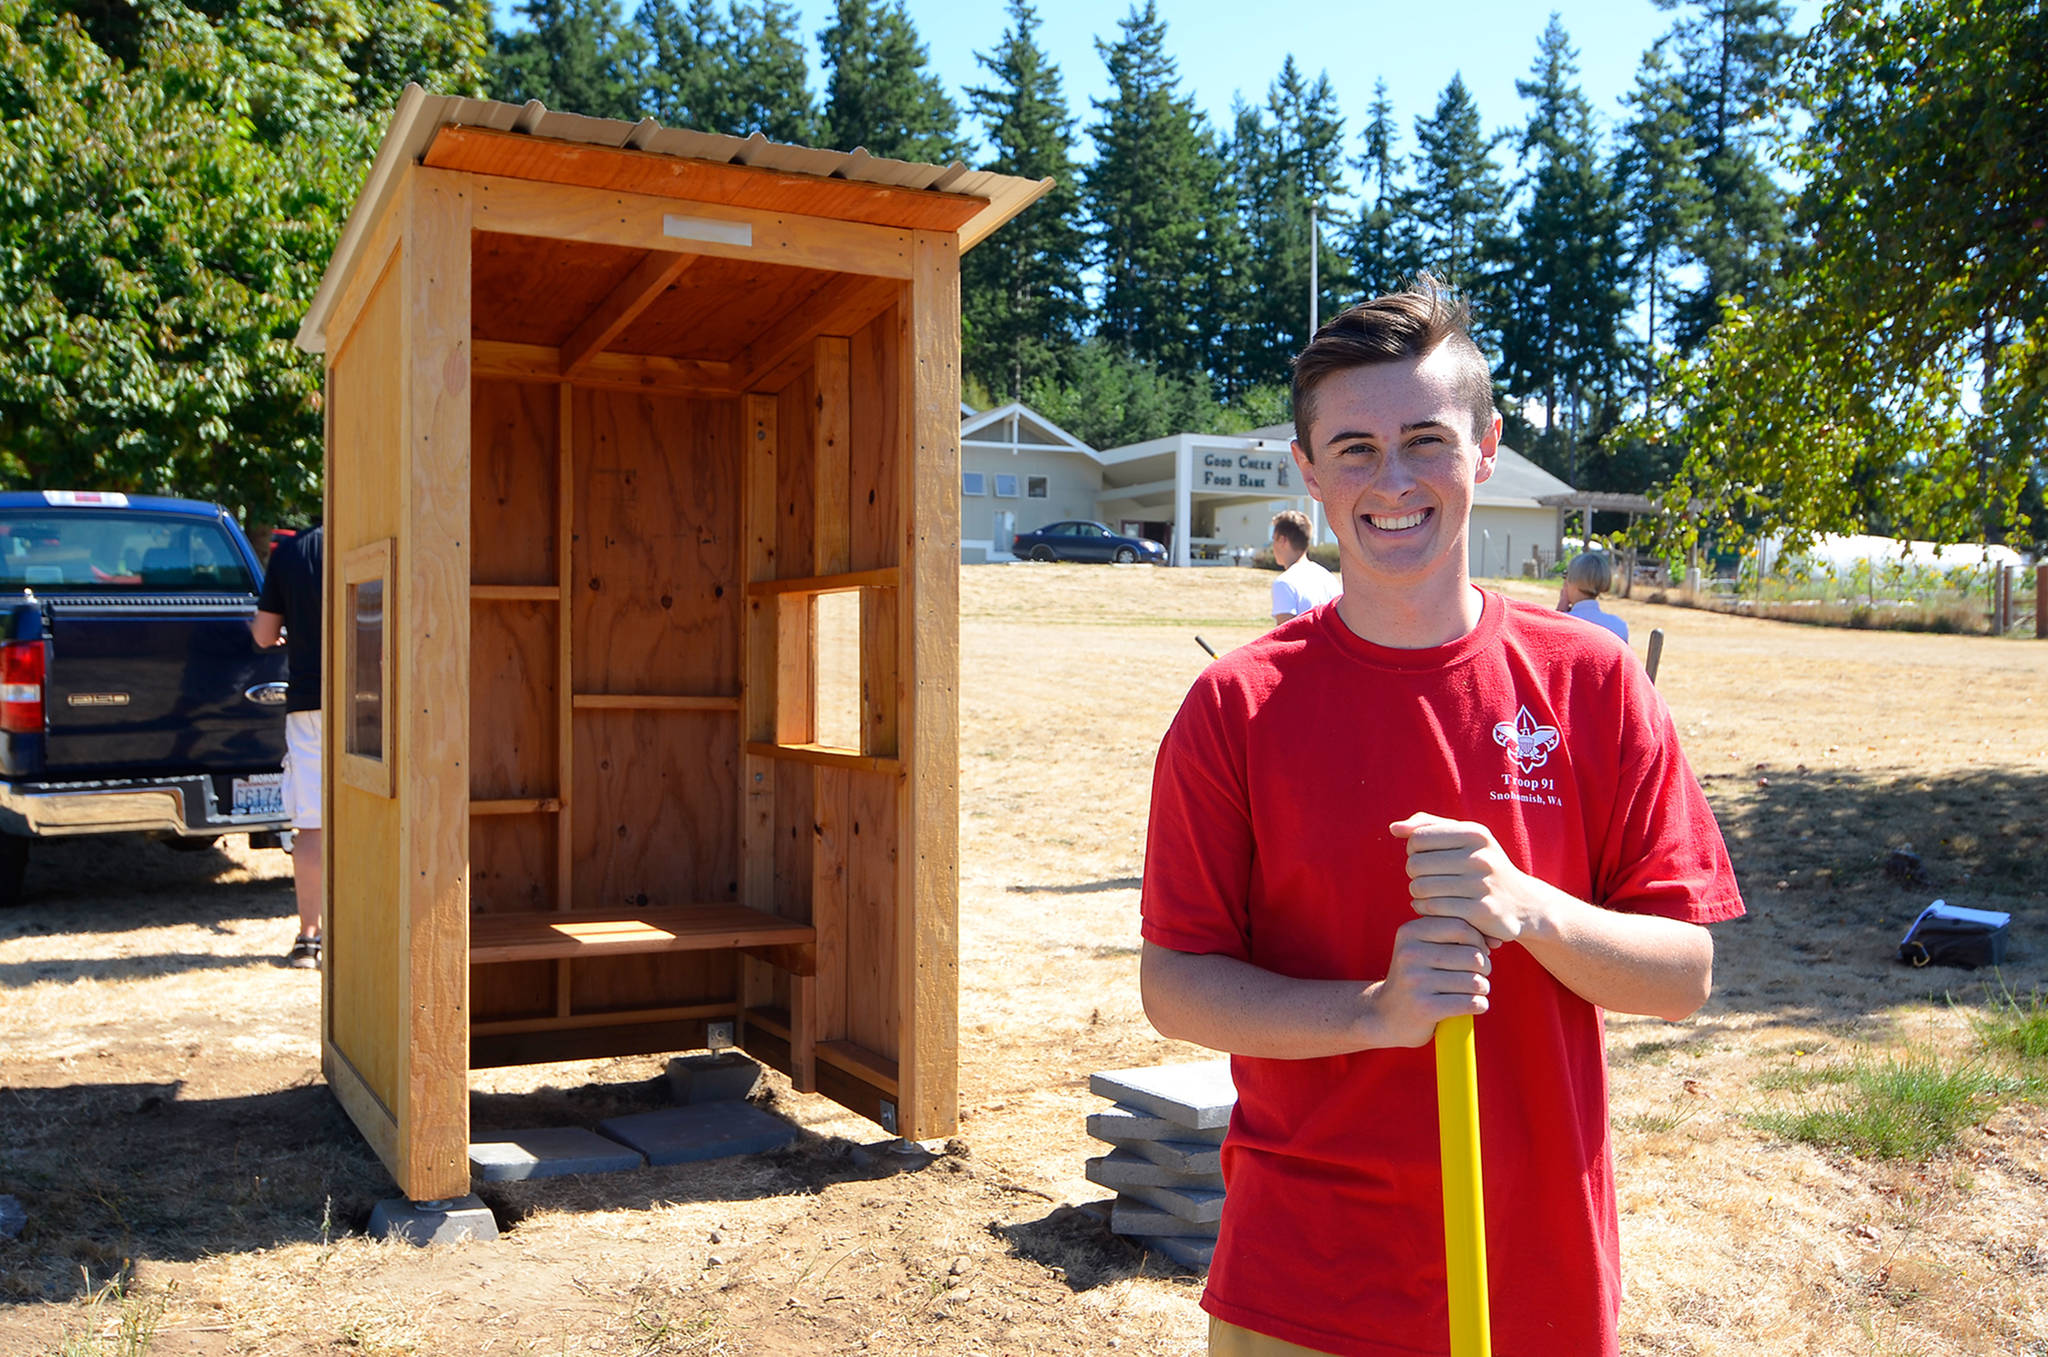 Boy scout with Whidbey roots builds shelter for food bank